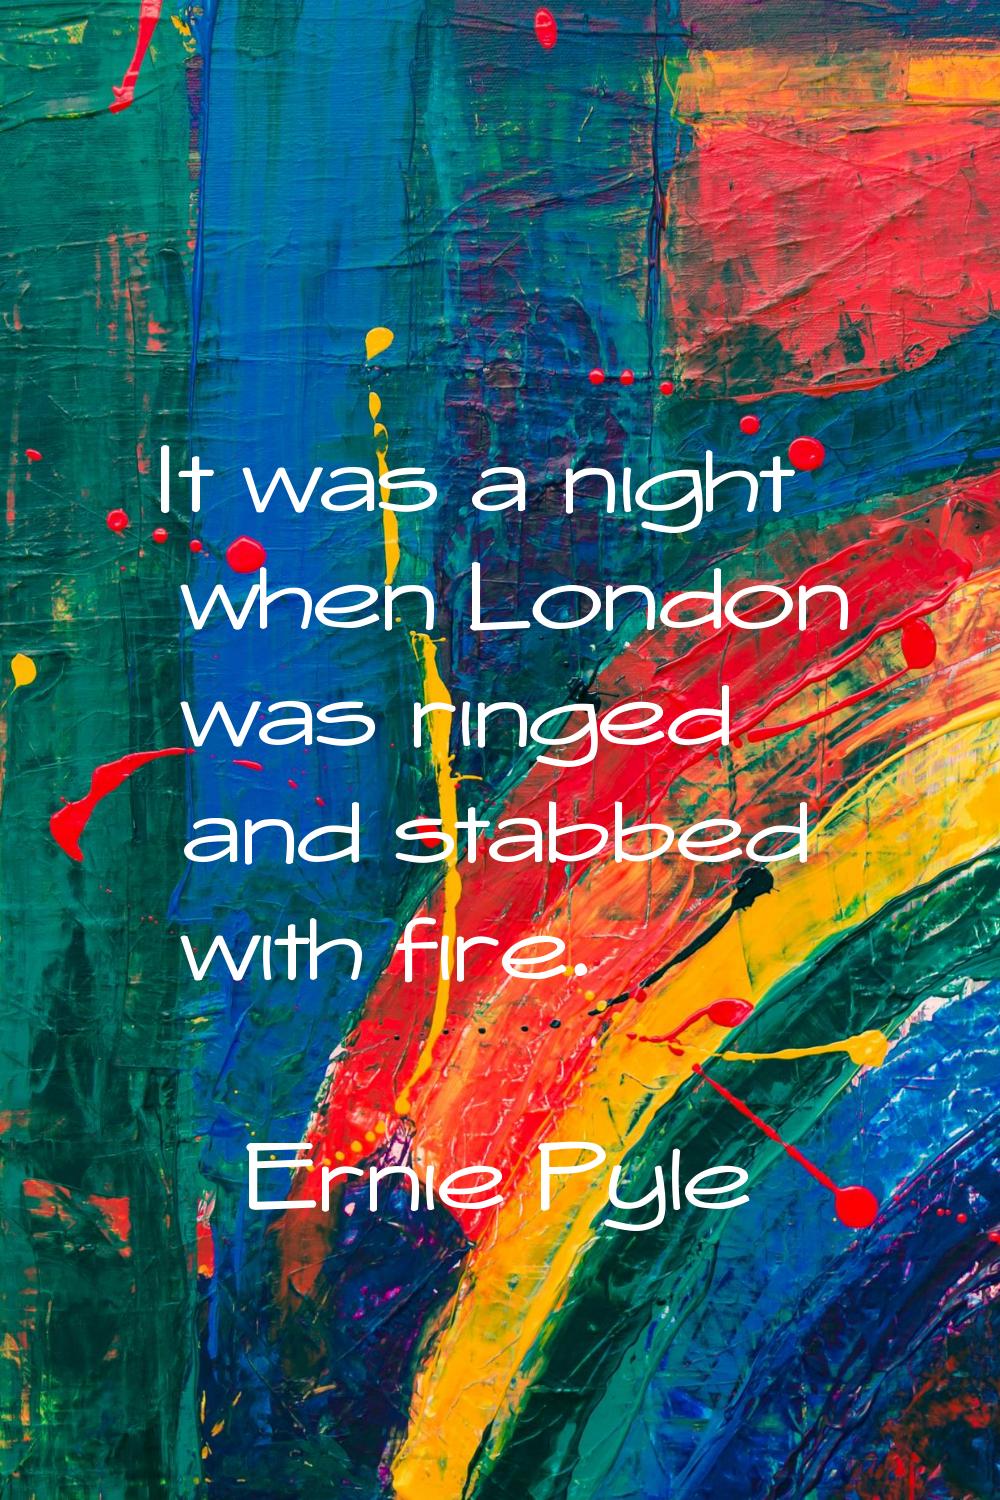 It was a night when London was ringed and stabbed with fire.